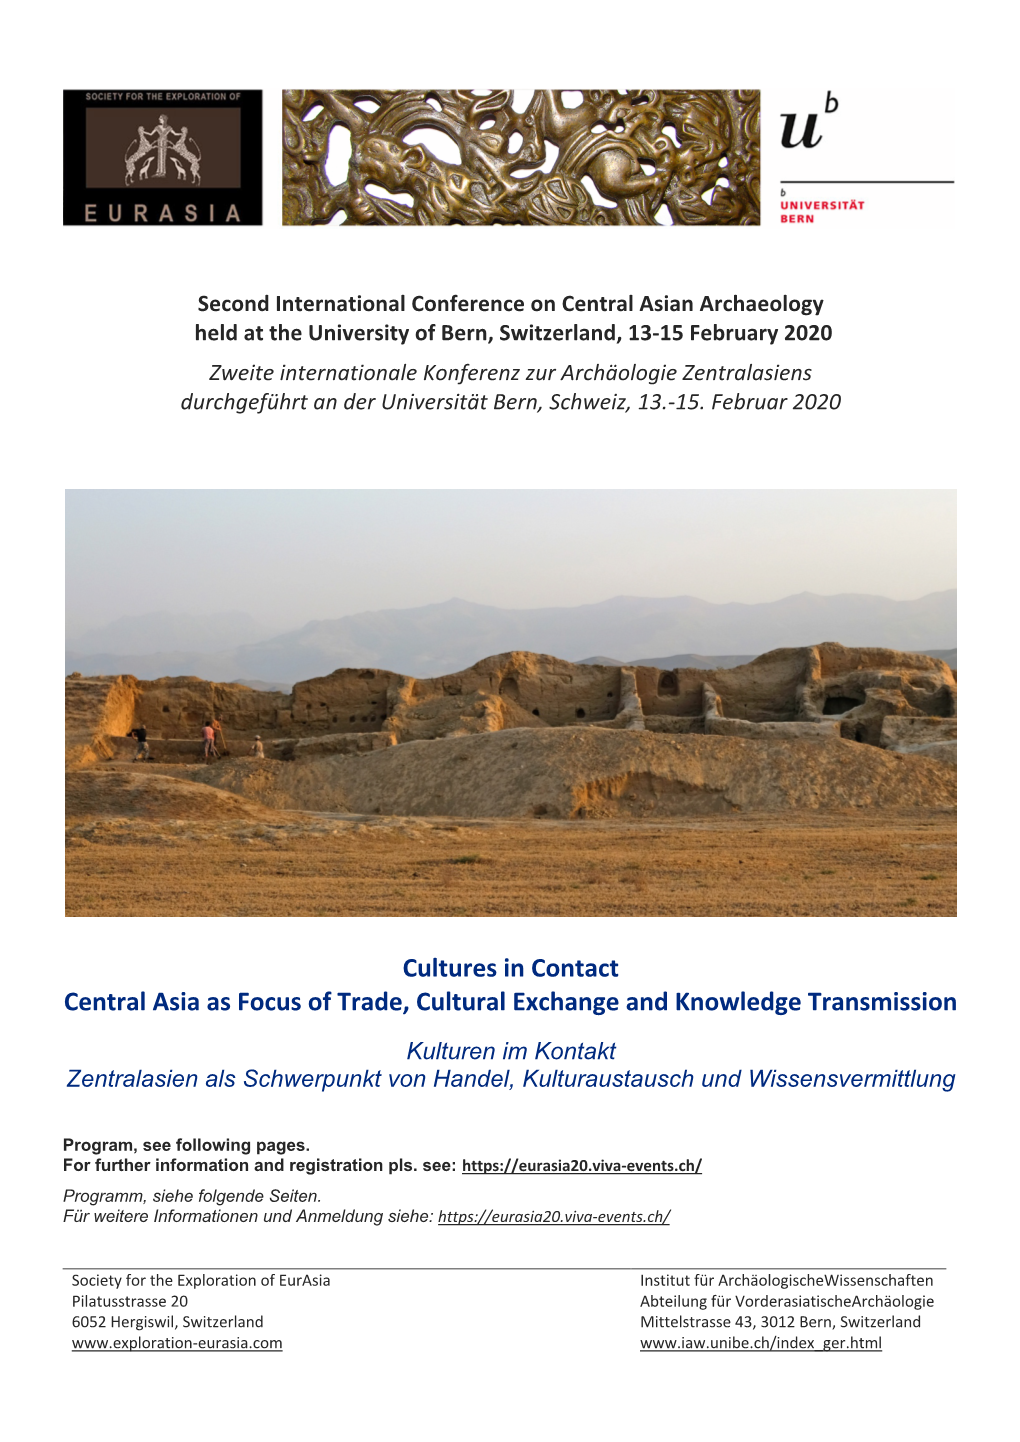 Cultures in Contact Central Asia As Focus of Trade, Cultural Exchange and Knowledge Transmission